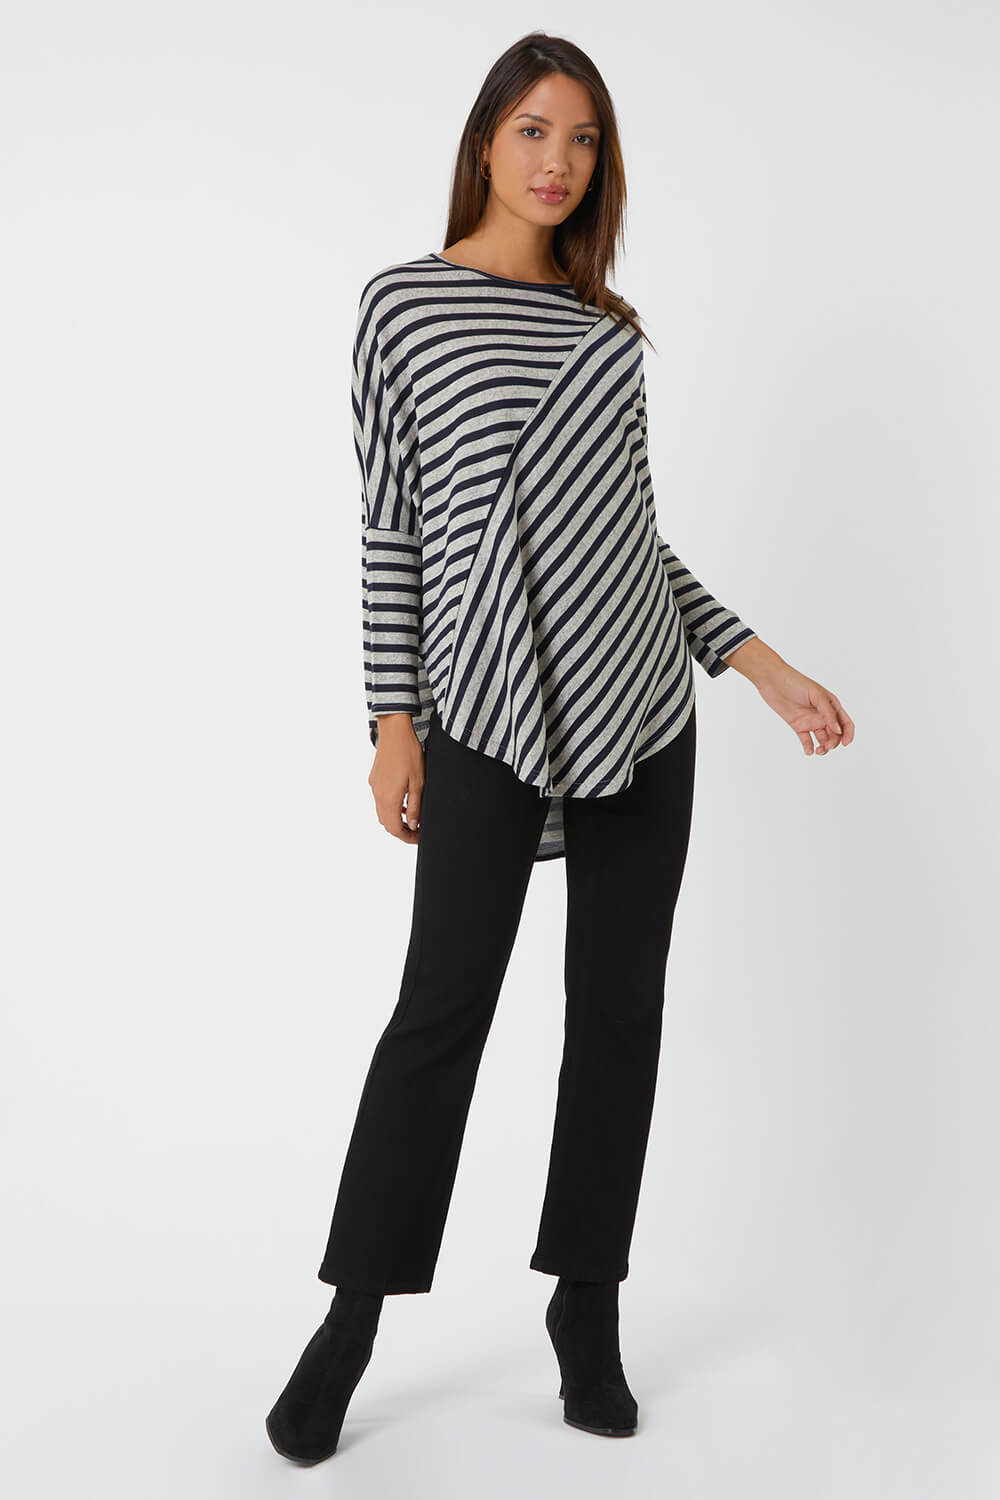 Grey Contrast Stripe Stretch Jersey Top, Image 2 of 5